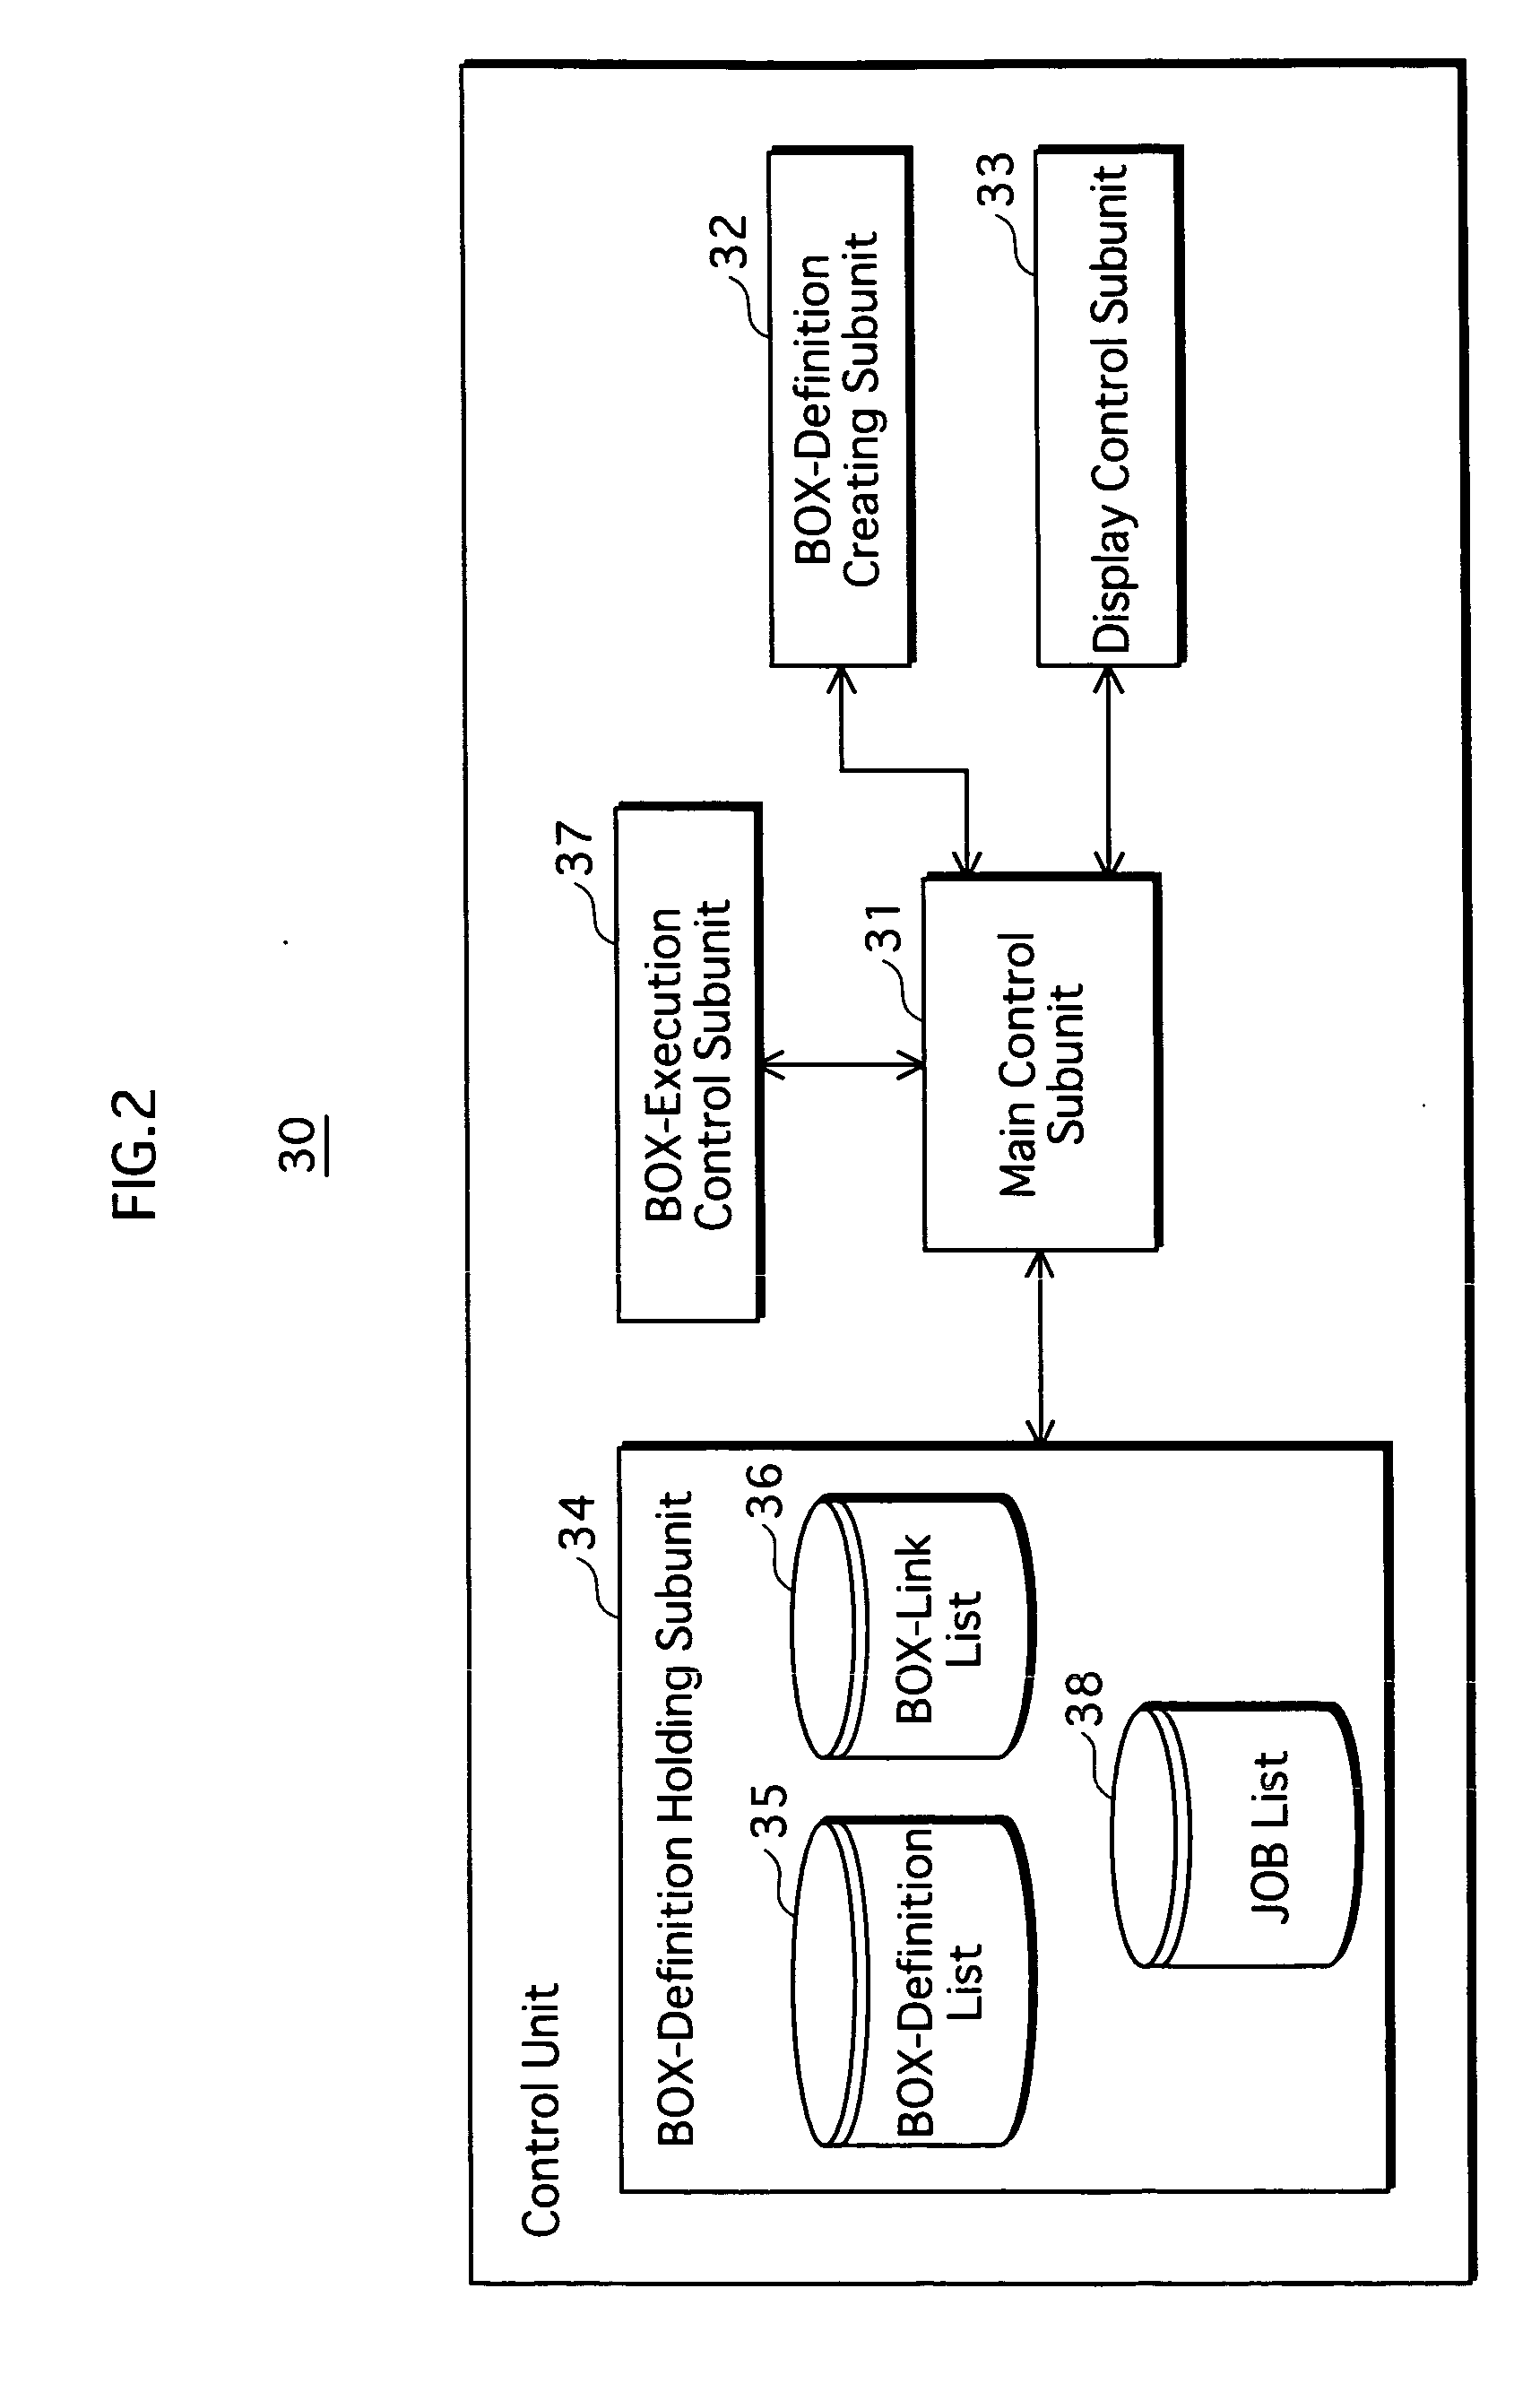 Method and apparatus for displaying workflow